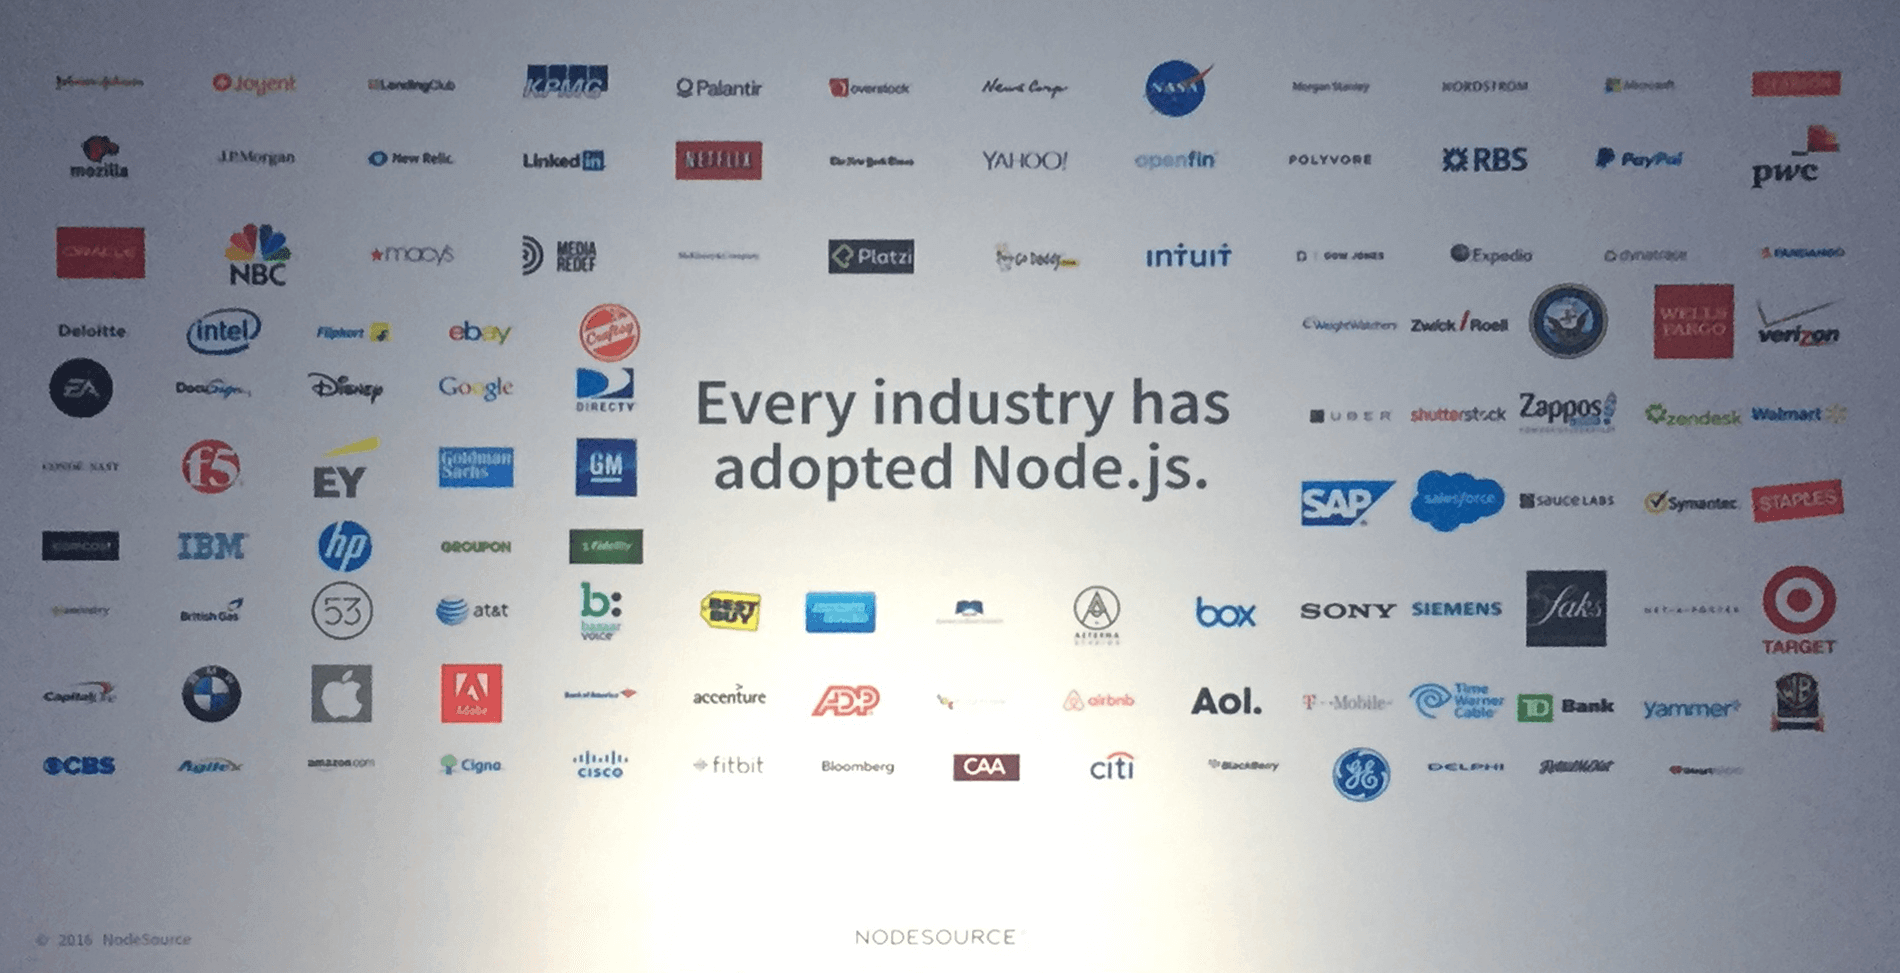 Every Industry has adopted Node.js